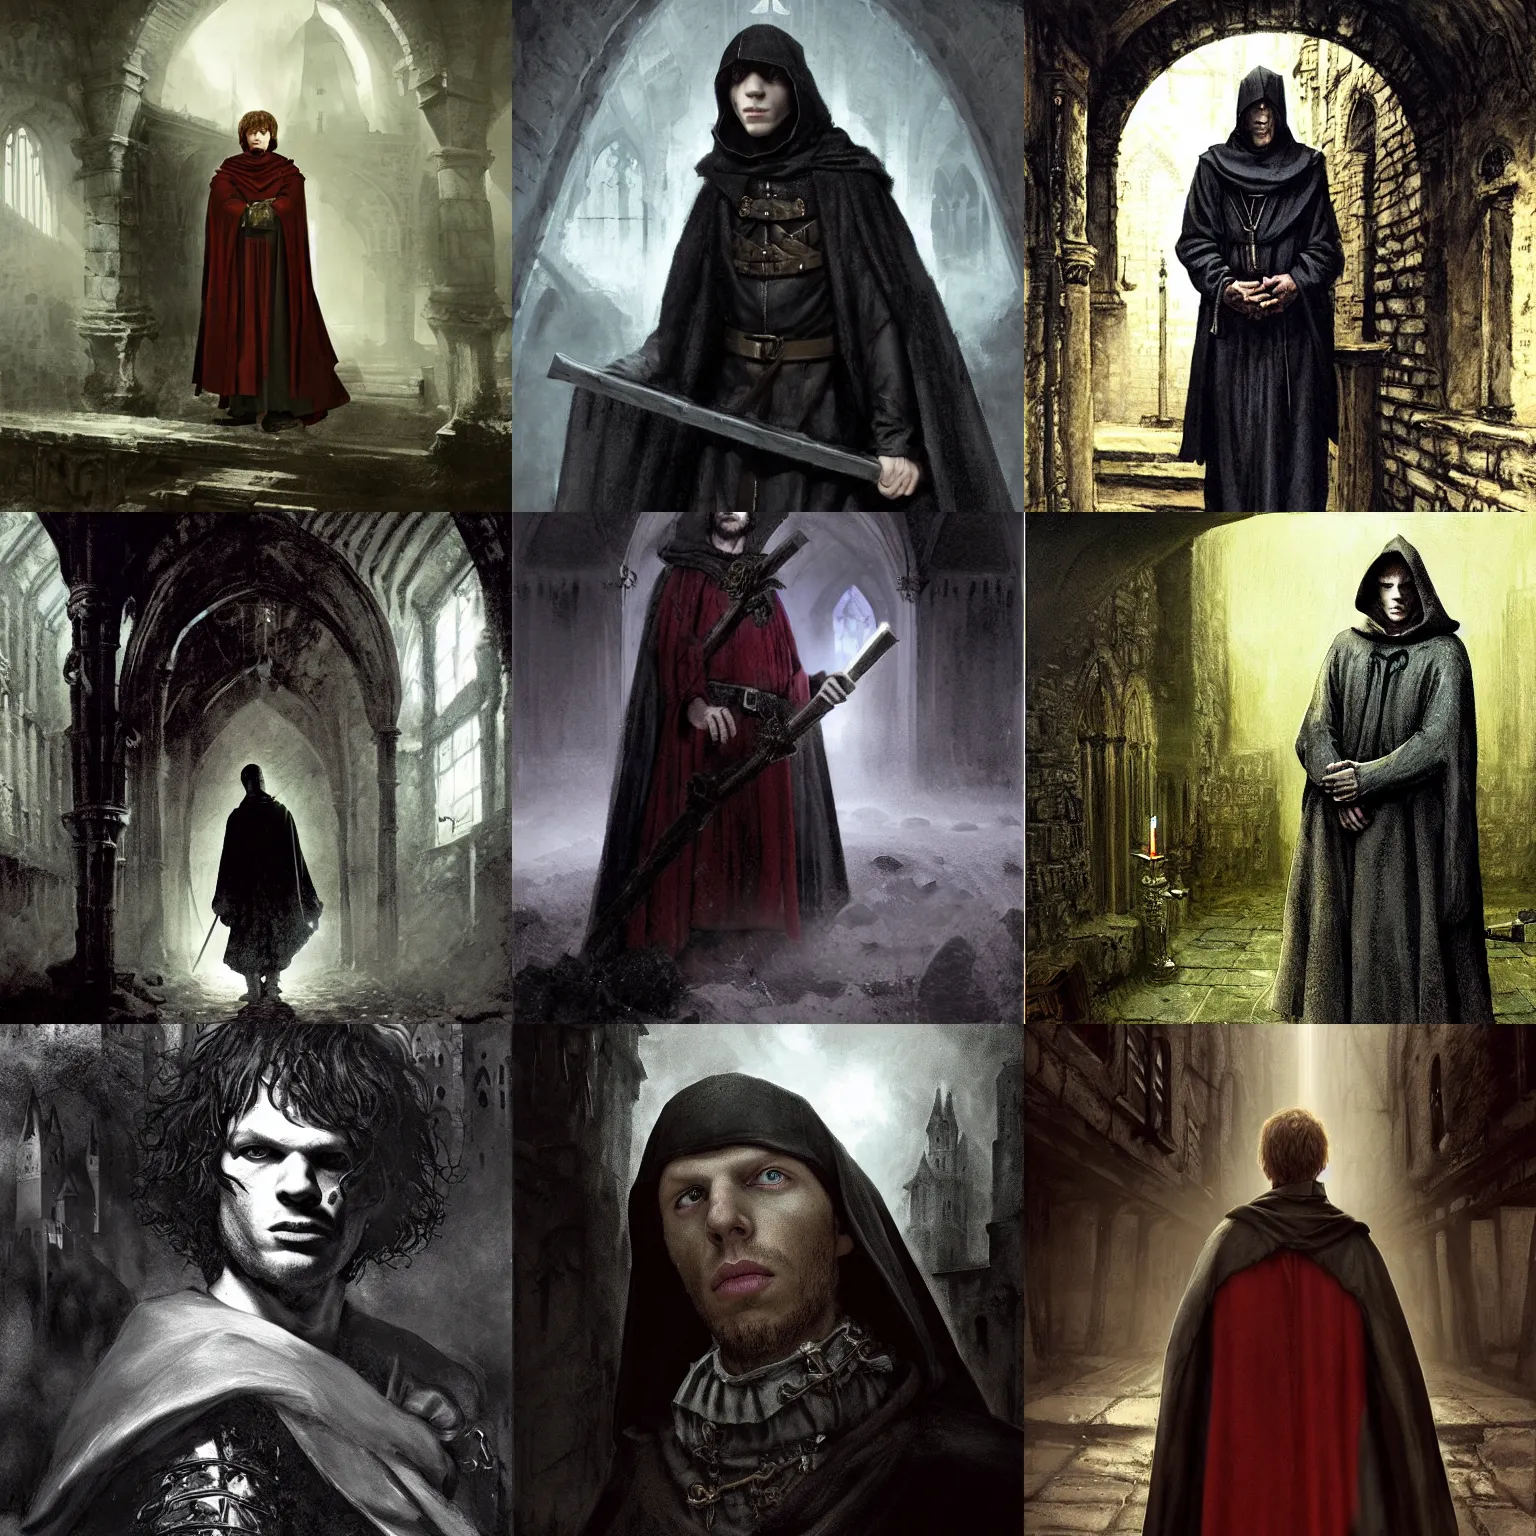 Prompt: jesse eisenberg as an enigmatic medieval christian ( ( monk ) ) in a dark underground city. dark shadows, colorful, law contrasts, ( ( ( ambient occlusion ) ) ) fantasy portrait by jakub rozalski, jan matejko, and j. dickenson